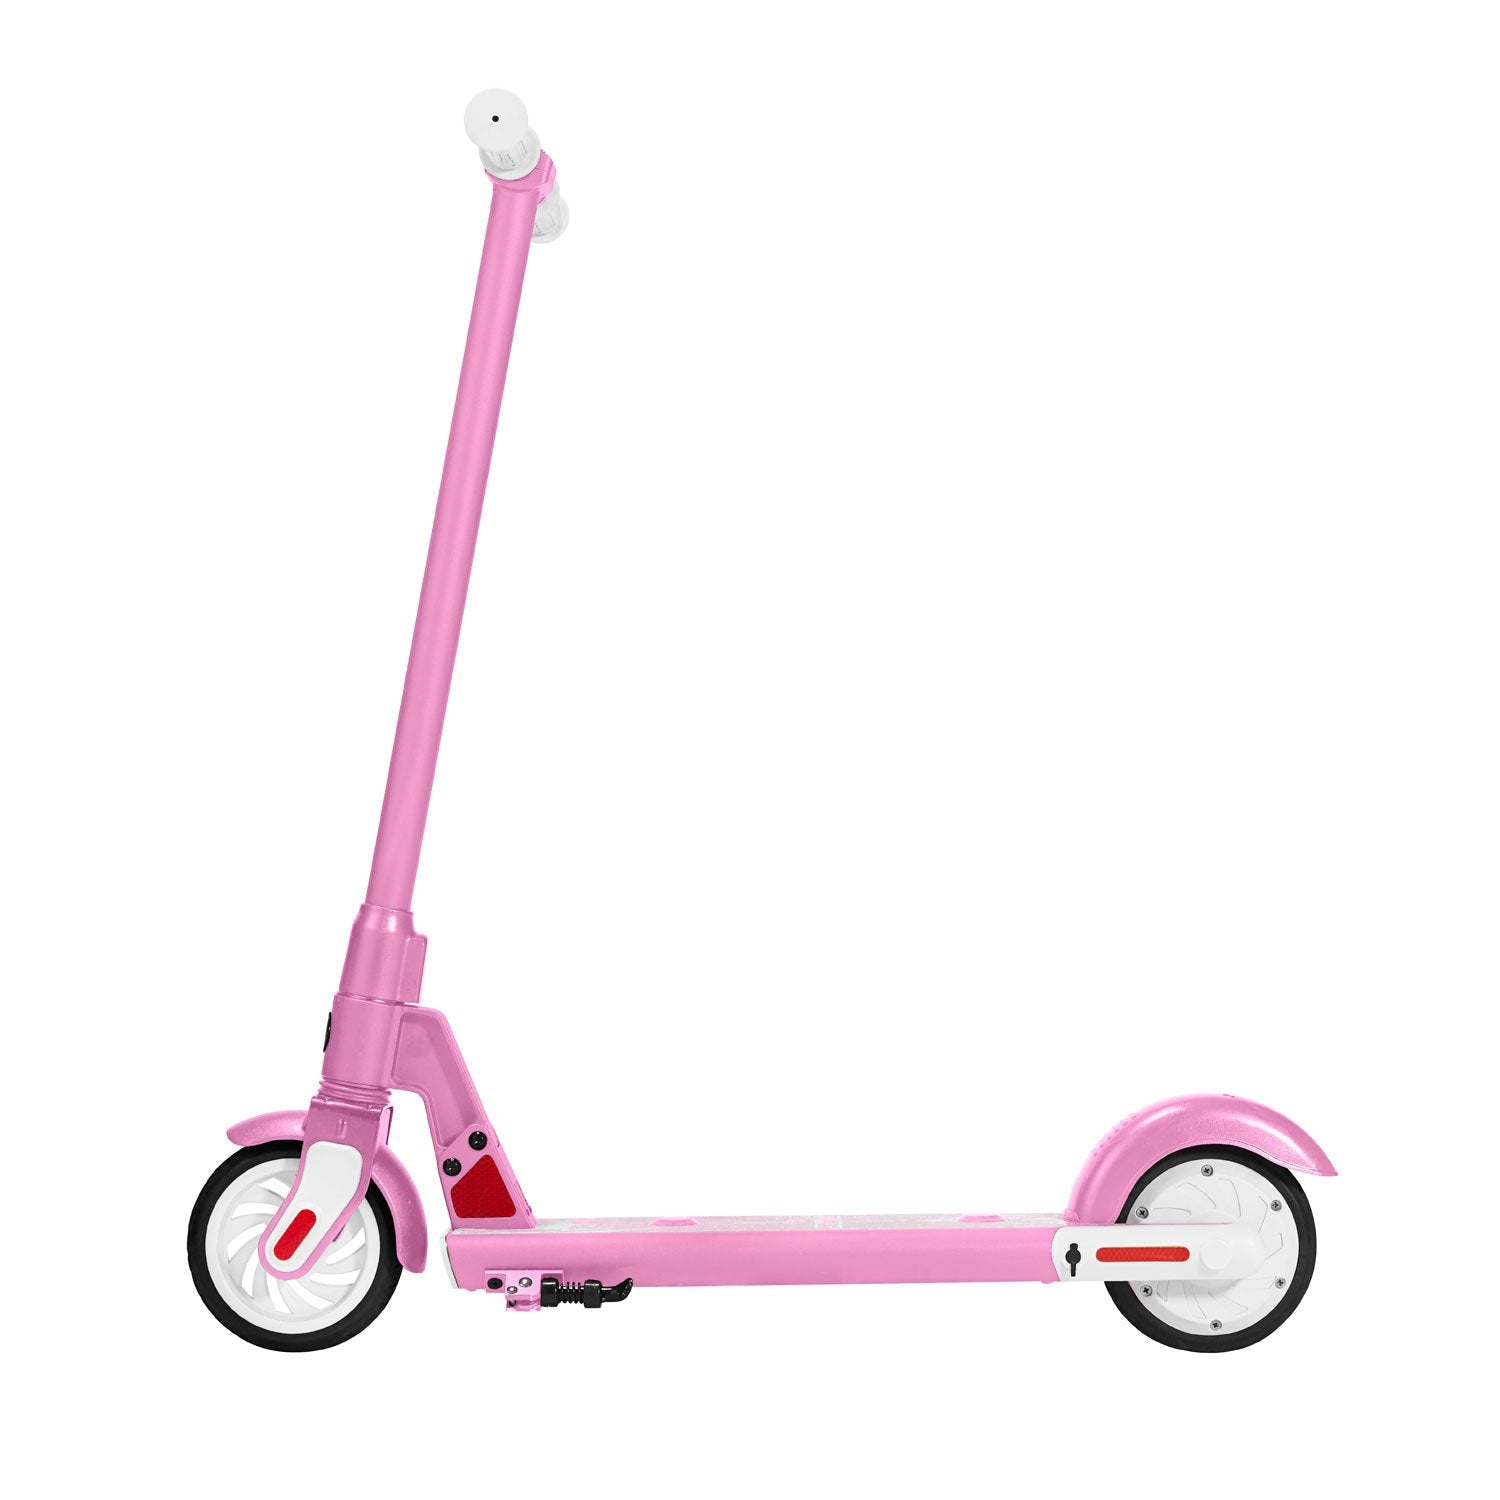 Pink gks electric scooter for kids side image